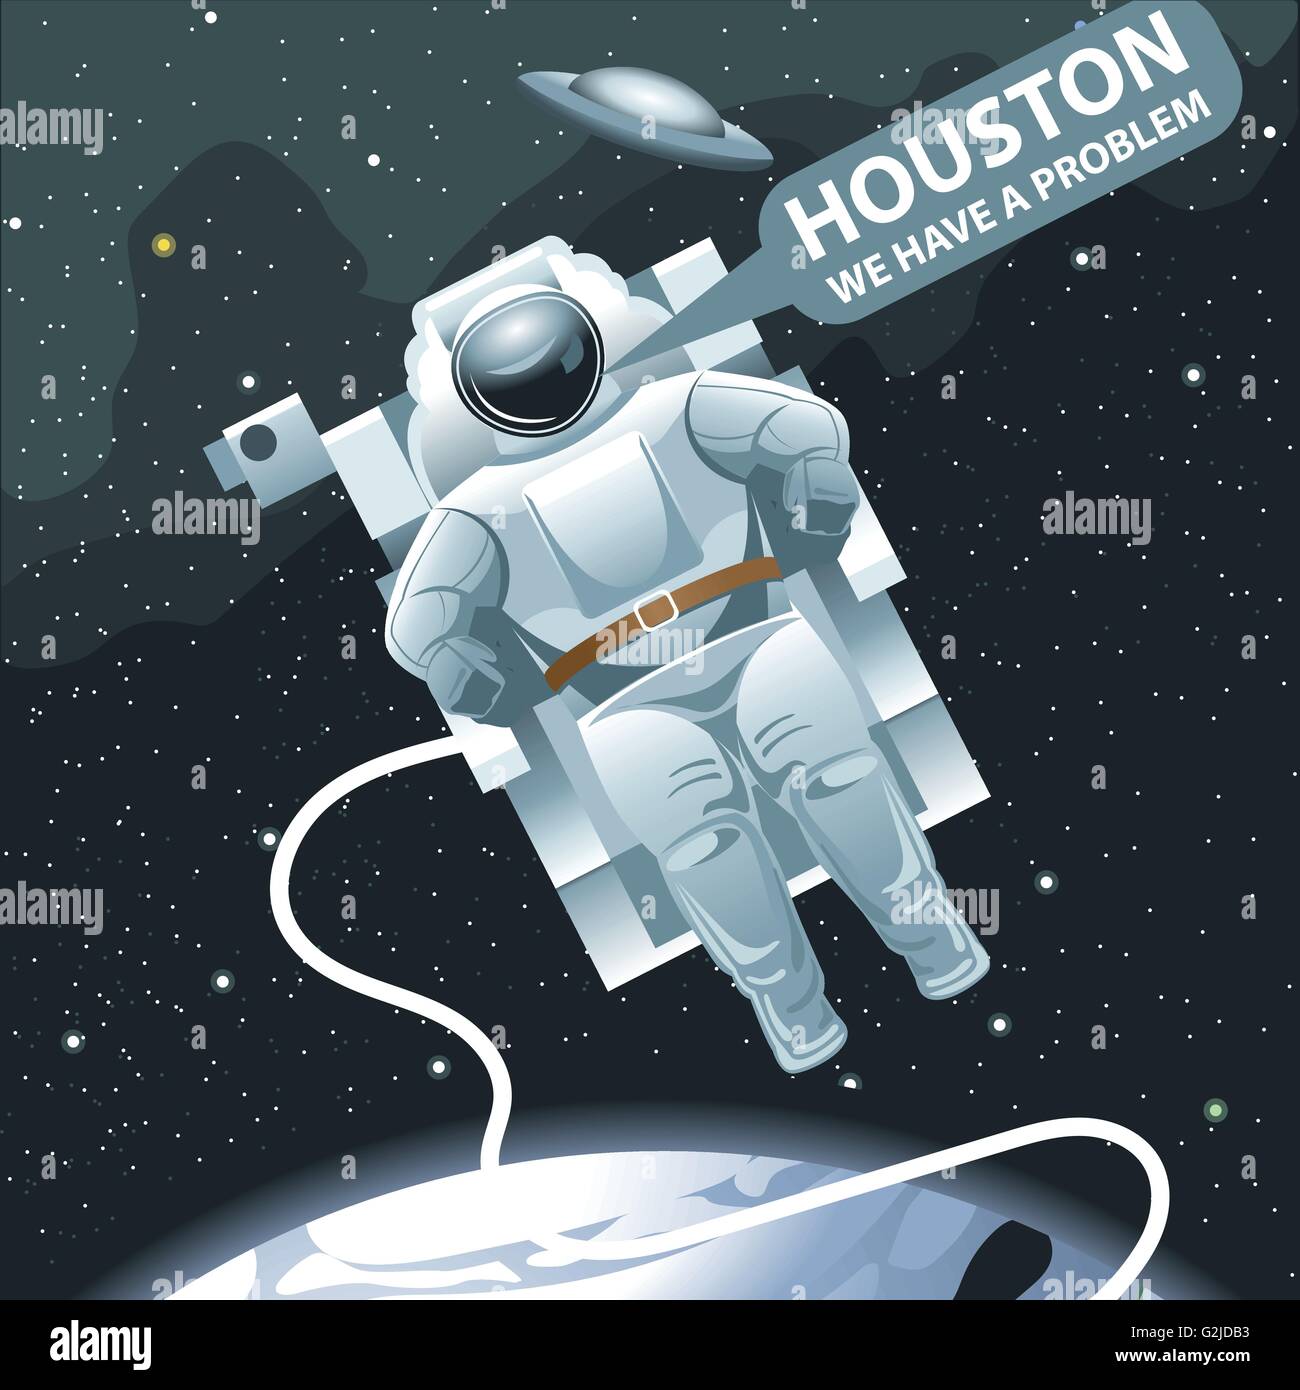 Astronaut in spacesuit flying in space and calling for Houston. Background with stars, planets and galaxies. Digital vector imag Stock Vector